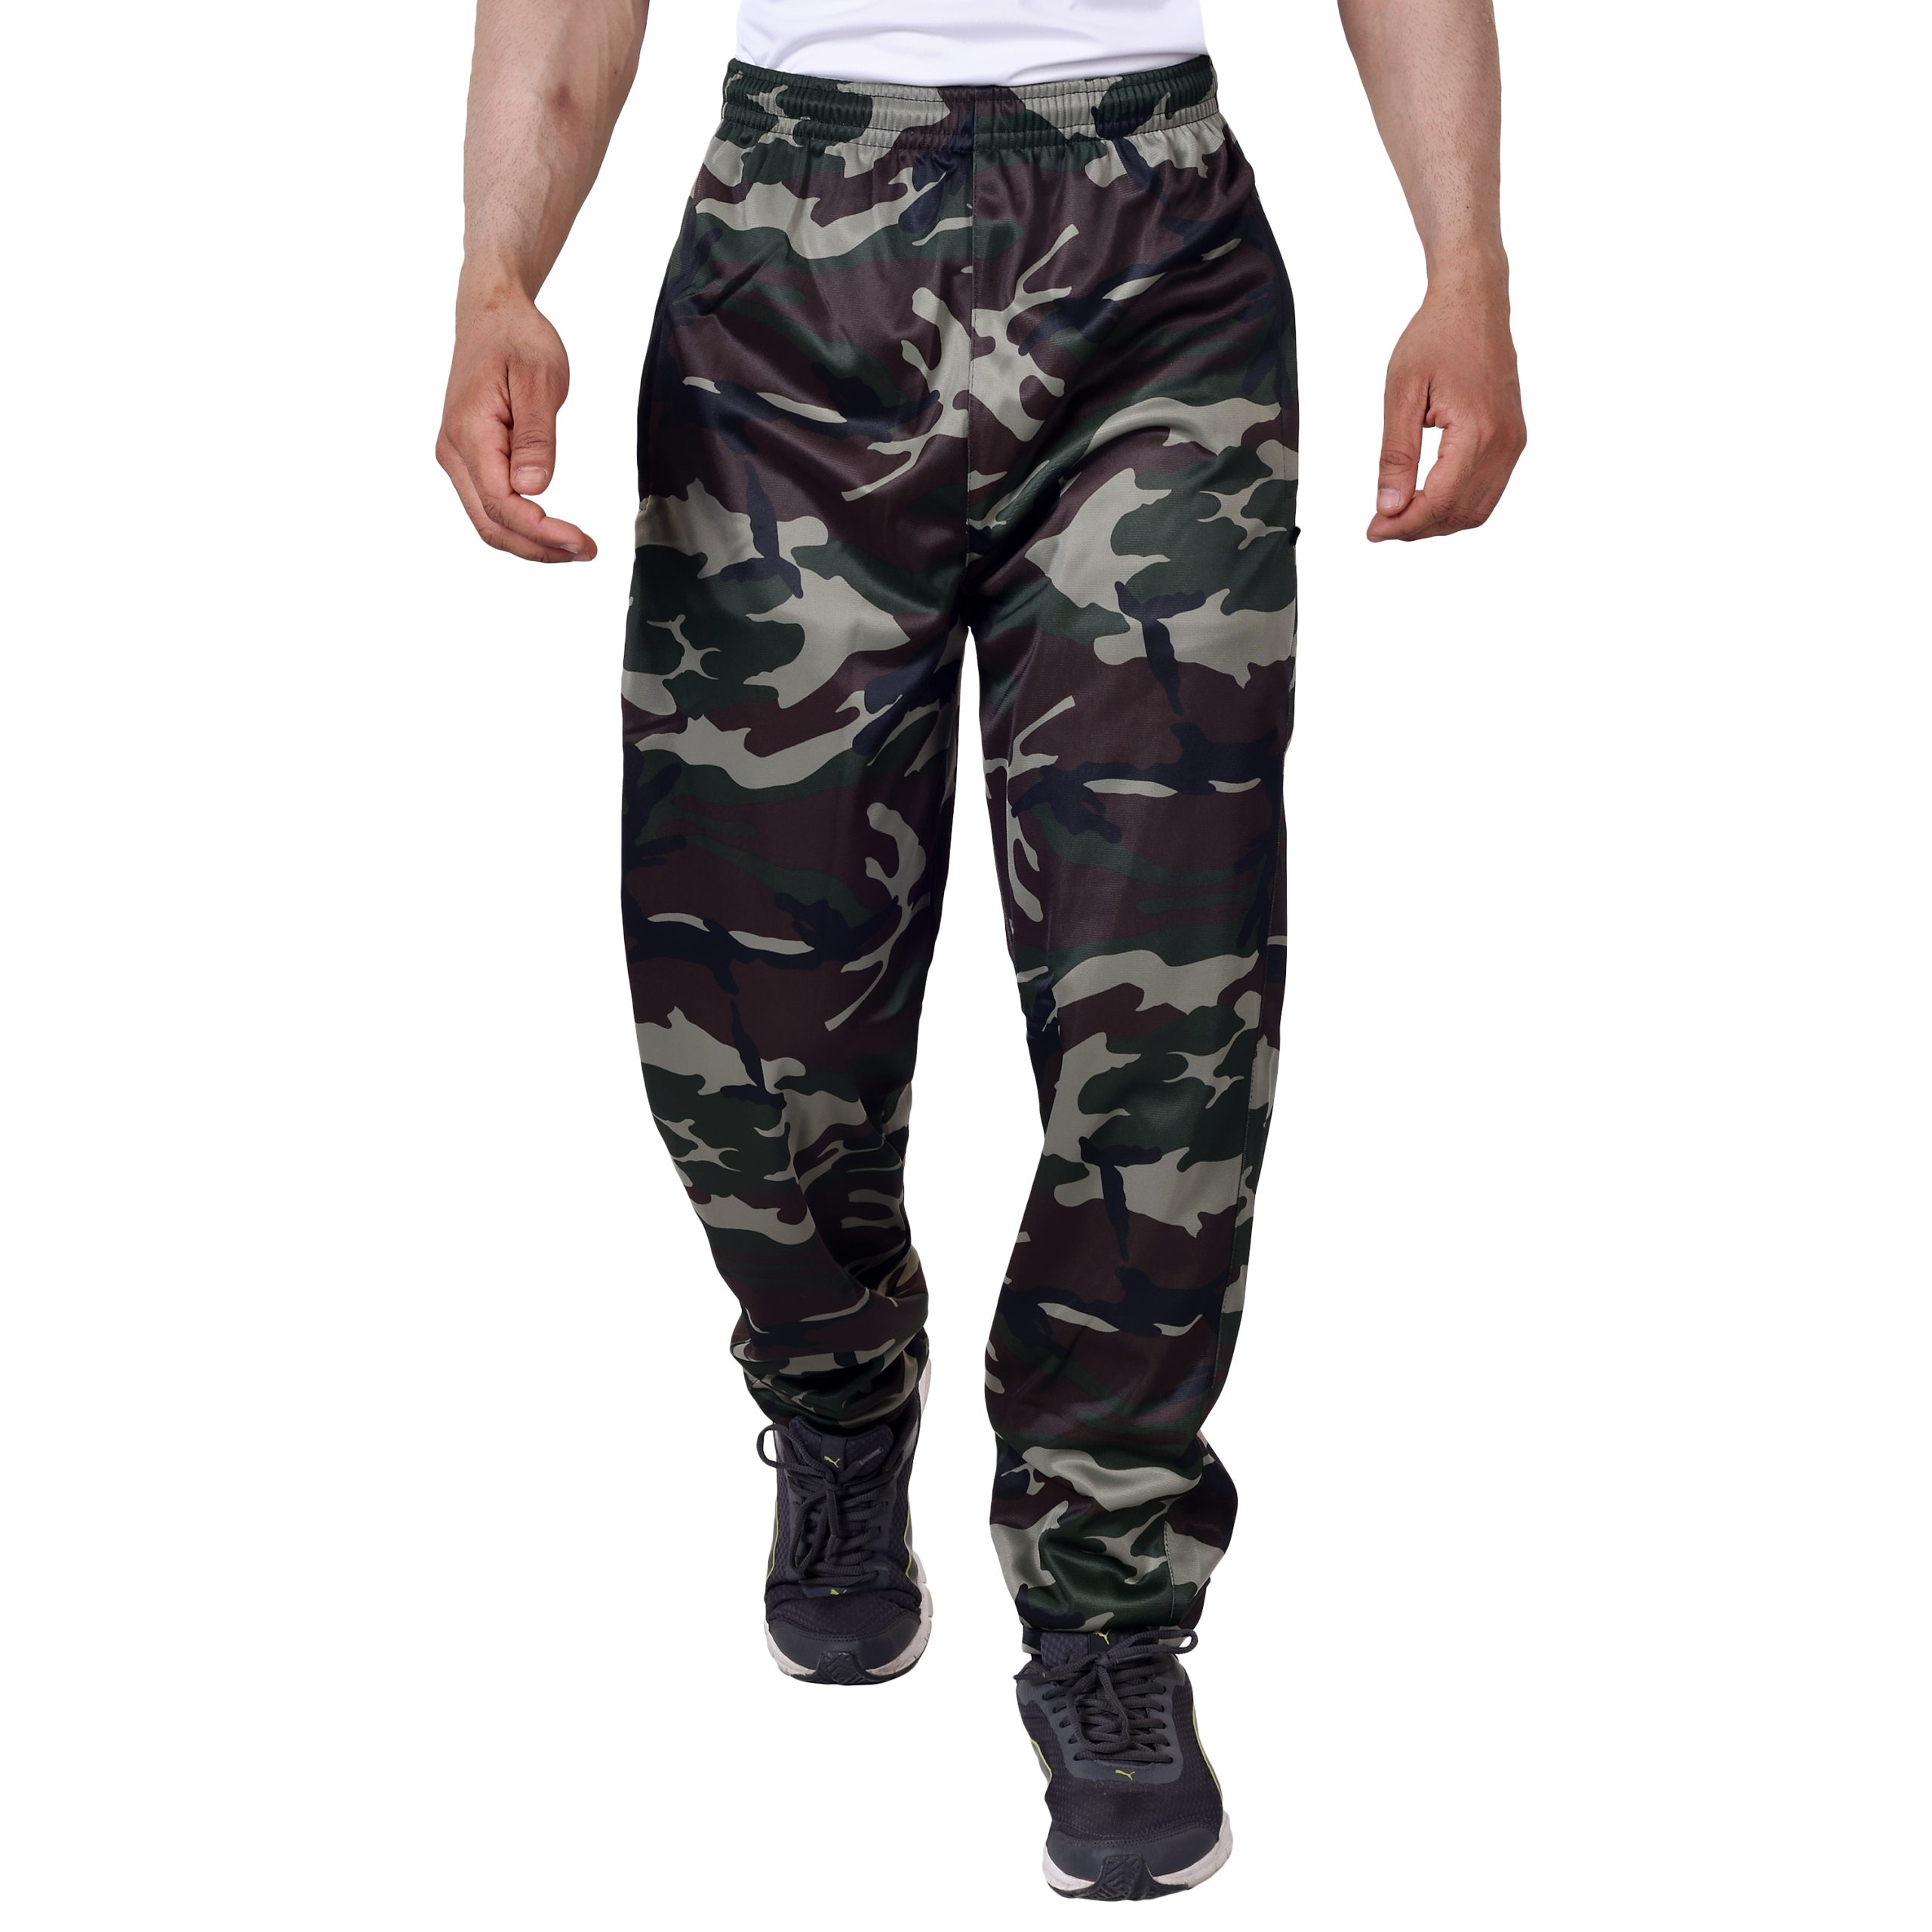 Cotton Military Camo Cargo Pant at Best Price in Chennai  Ripples